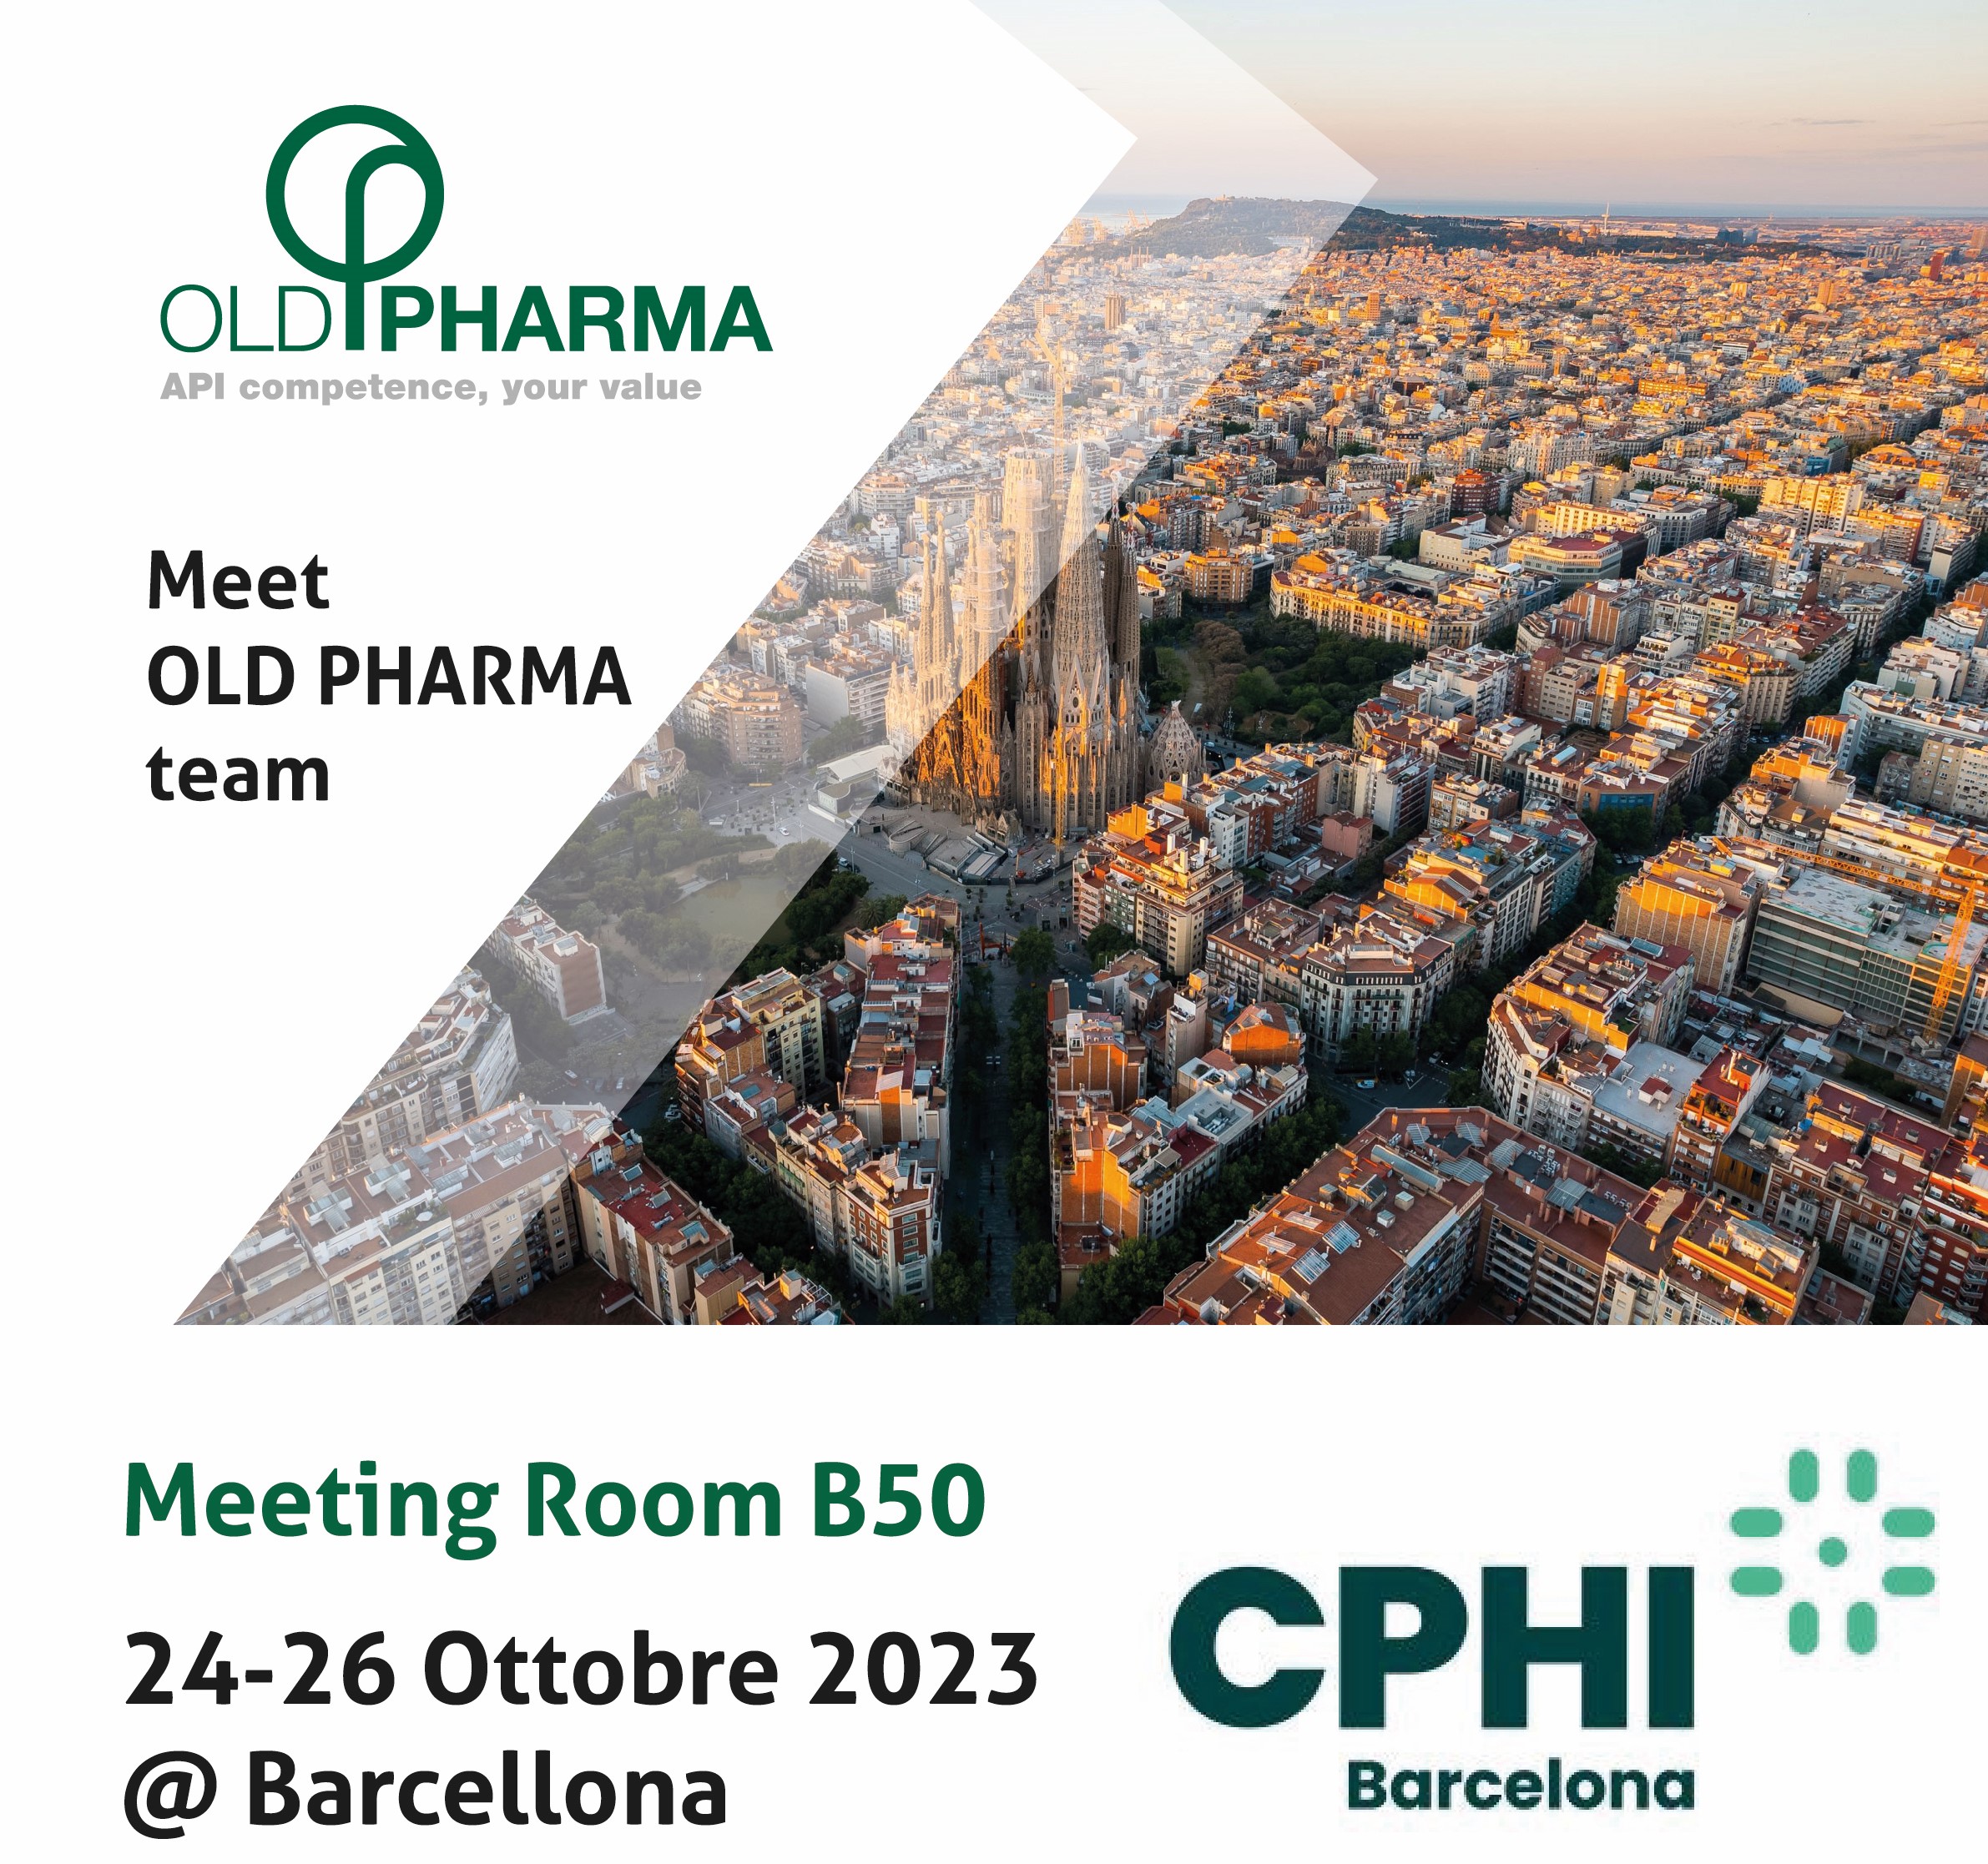 CPHI 2023 Barcelona – A unique opportunity for pharmaceutical professionals